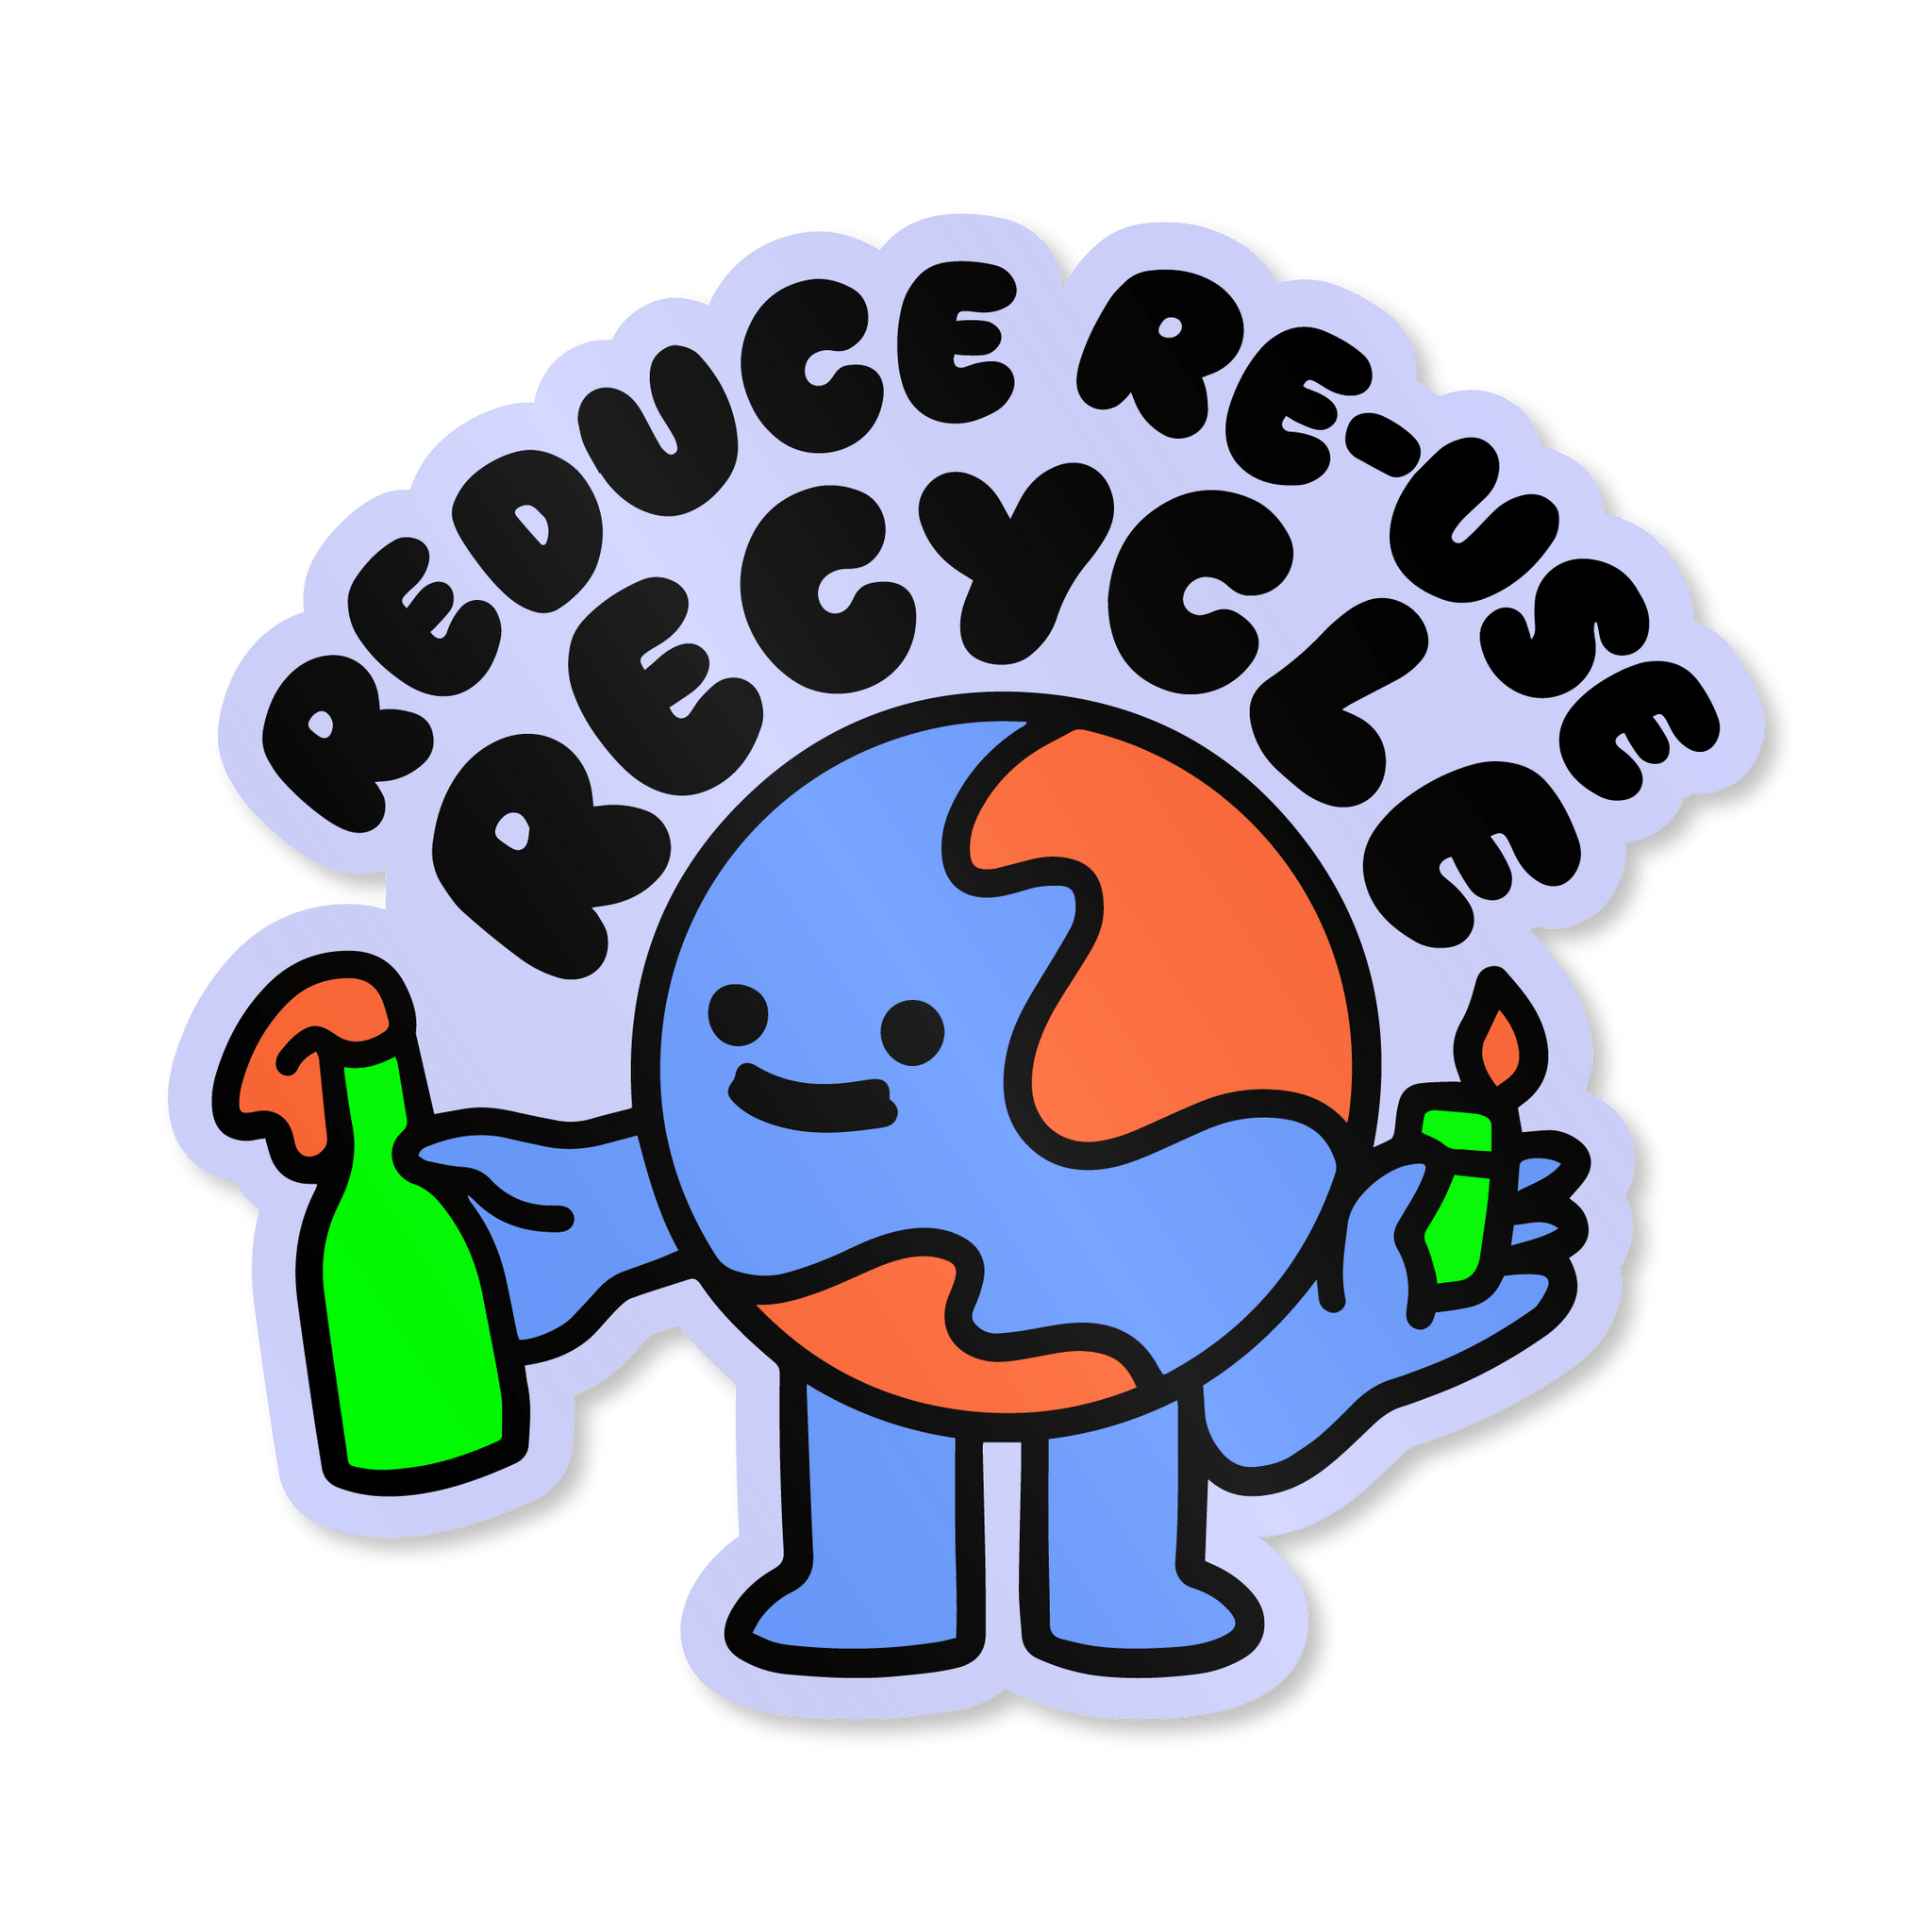 'Reduce Reuse Recycle' - Earth Vinyl Sticker